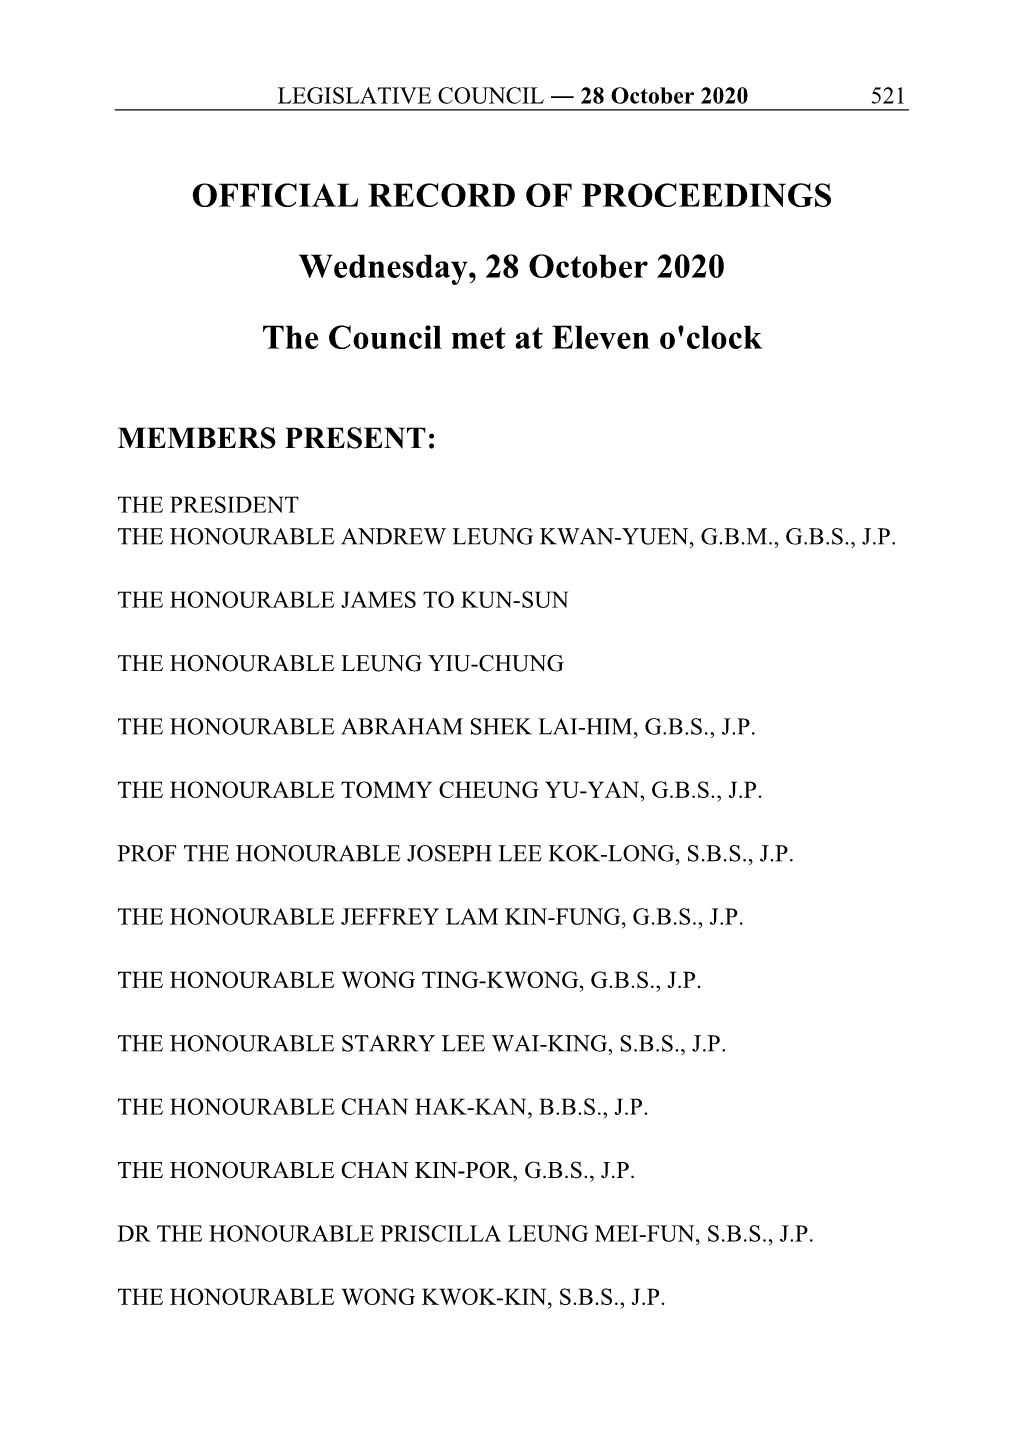 OFFICIAL RECORD of PROCEEDINGS Wednesday, 28 October 2020 the Council Met at Eleven O'clock